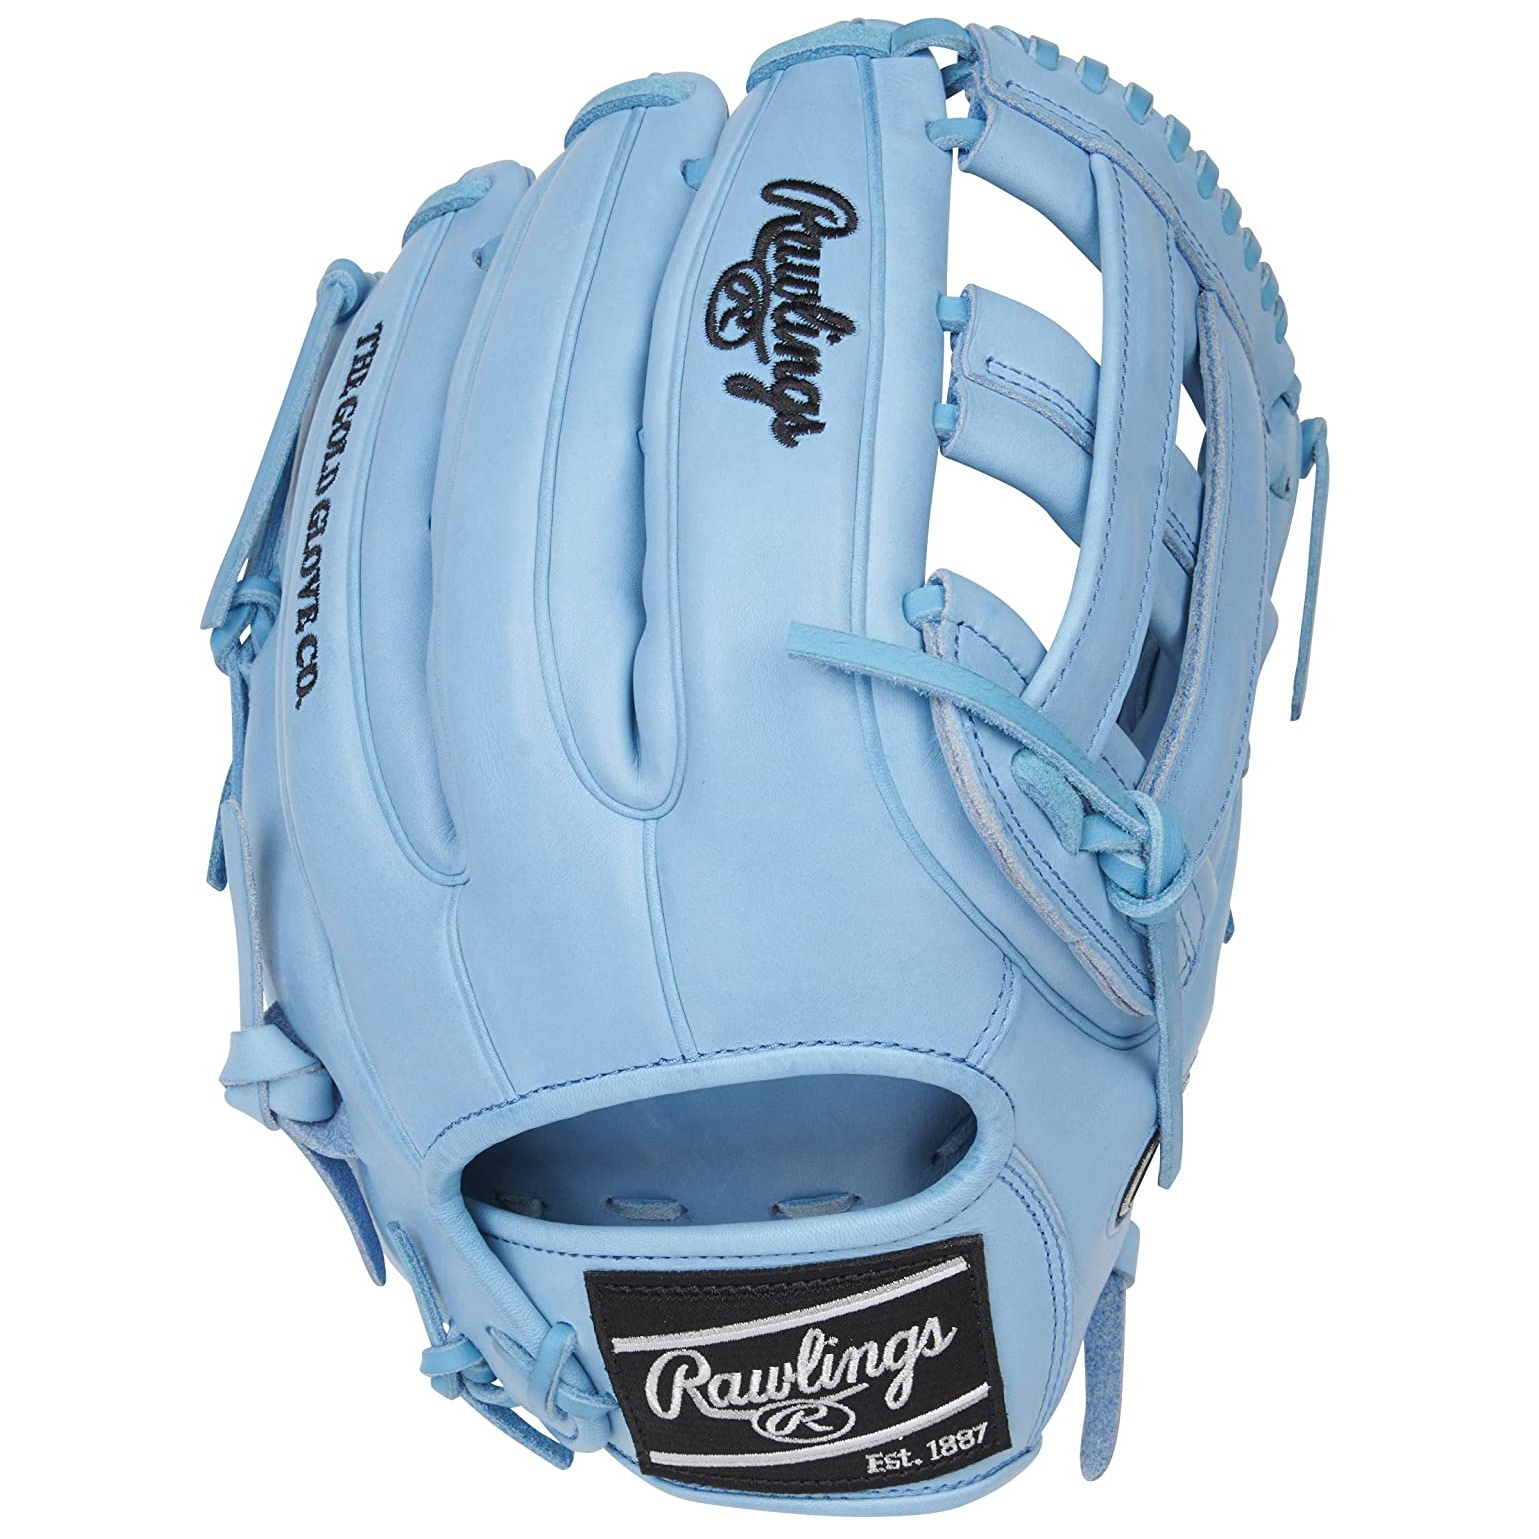 rawlings-heart-of-the-hide-12-75-inch-baseball-glove-pro-h-web-narrow-fit-right-hand-throw PROR3319-6CB-RightHandThrow Rawlings  <p>Constructed from Rawlings world-renowned Heart of the Hide steer leather.</p> <p>Taken